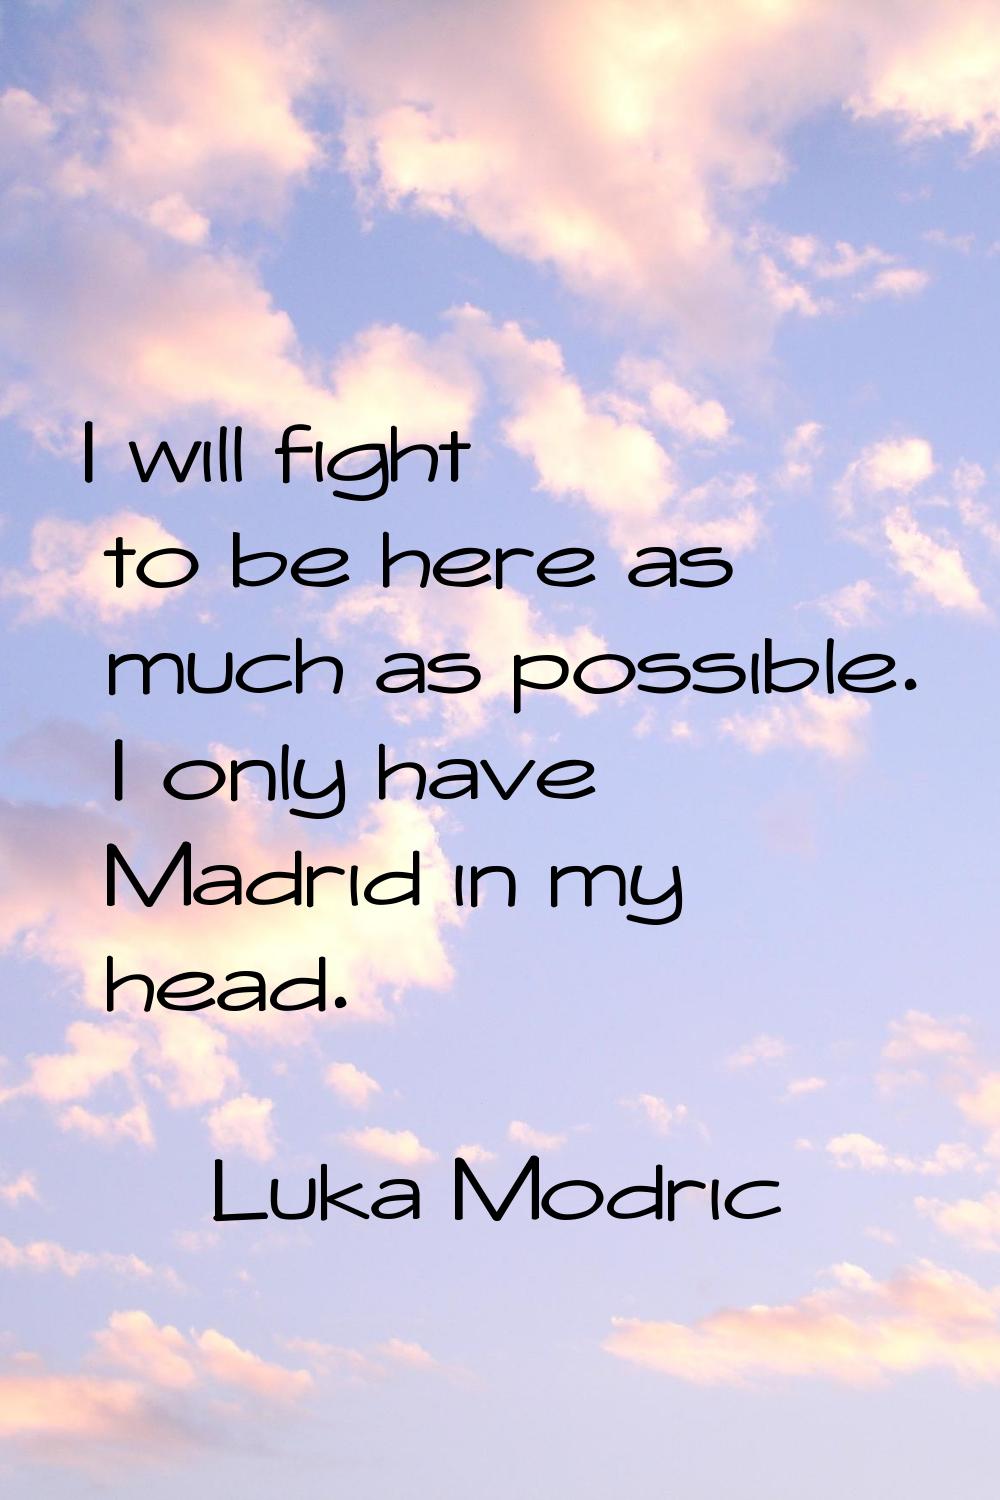 I will fight to be here as much as possible. I only have Madrid in my head.